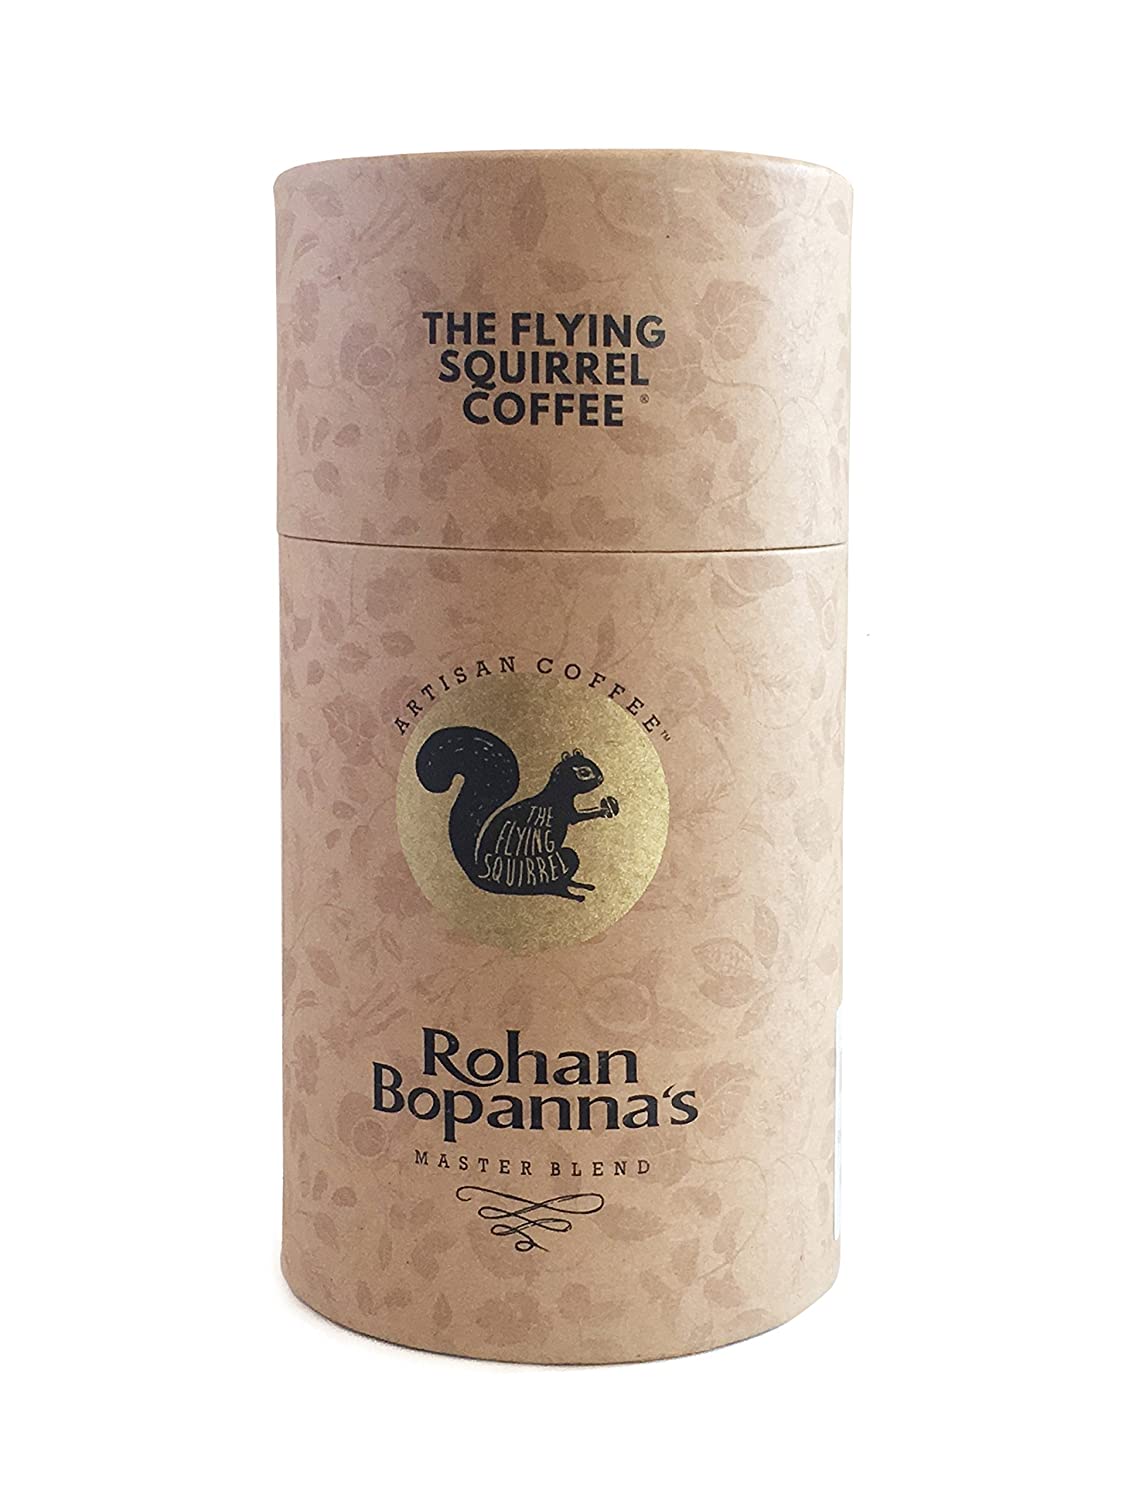 The Flying Squirrel Coffee Rohan Bopanna Masterblend Coffee Powder and Beans